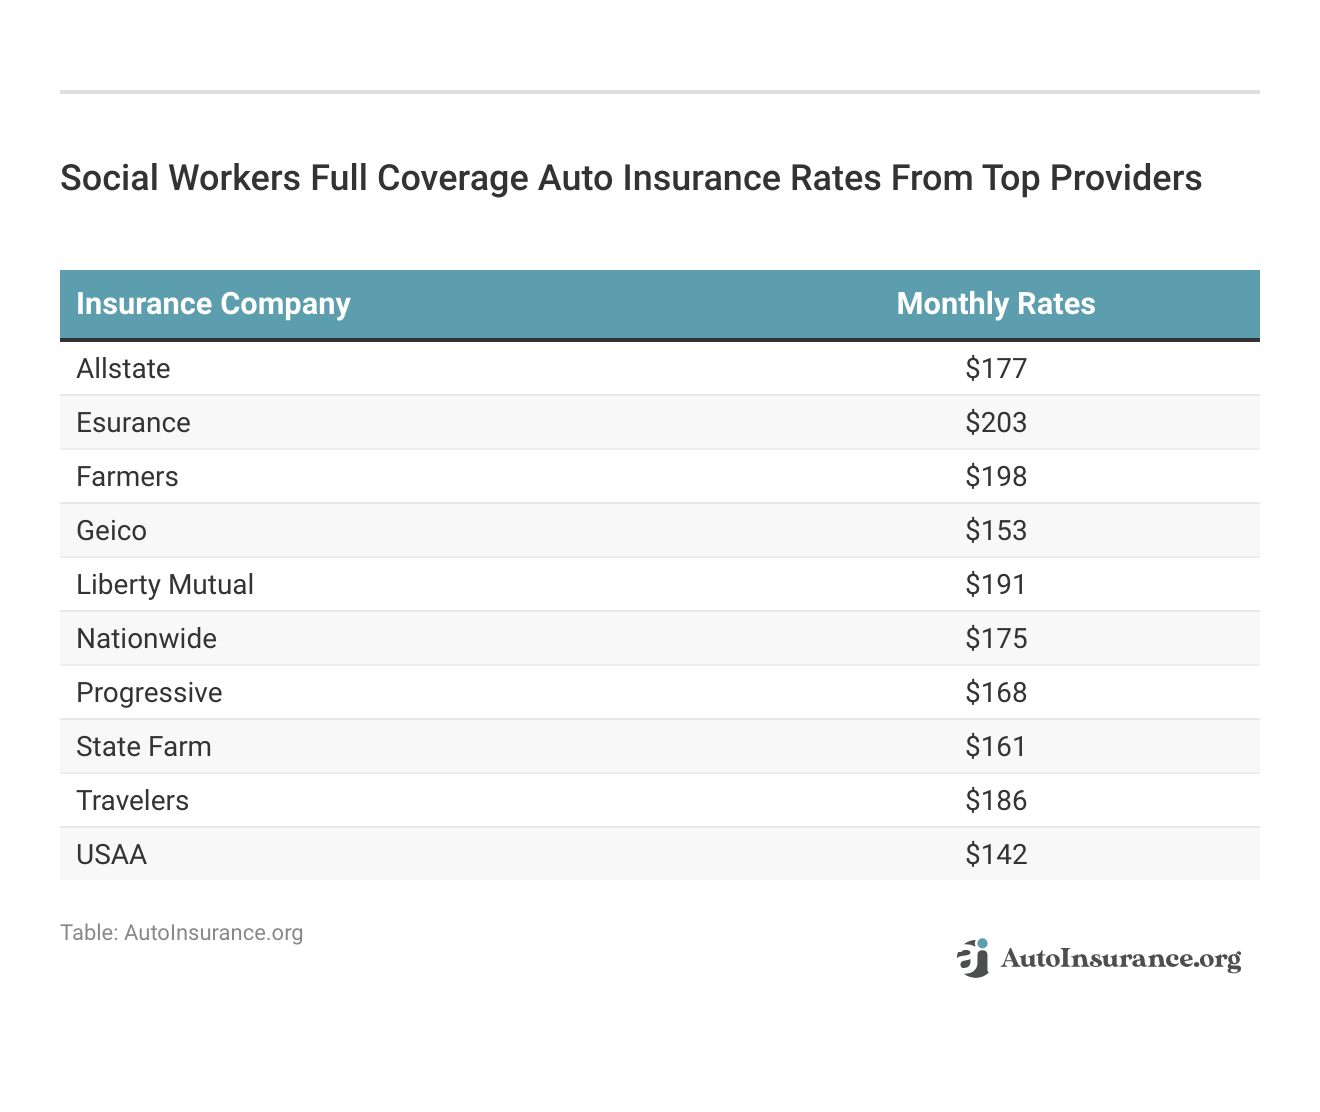 <h3>Social Workers Full Coverage Auto Insurance Rates From Top Providers</h3>